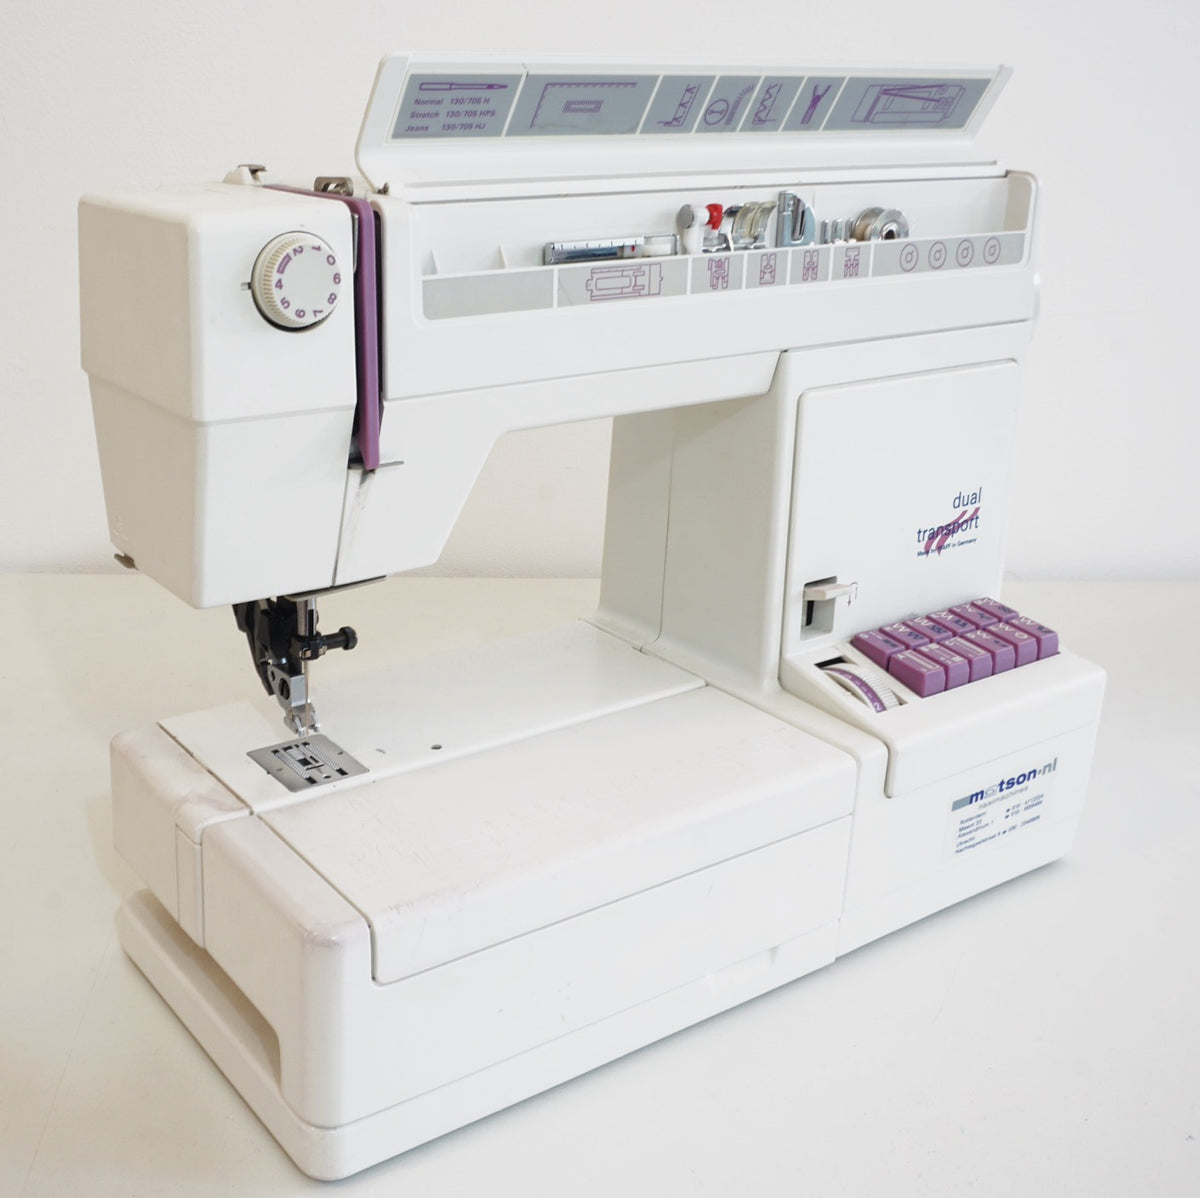 Sewing Machine Basics Workshop: IN PERSON OR ZOOM OPTIONS / The